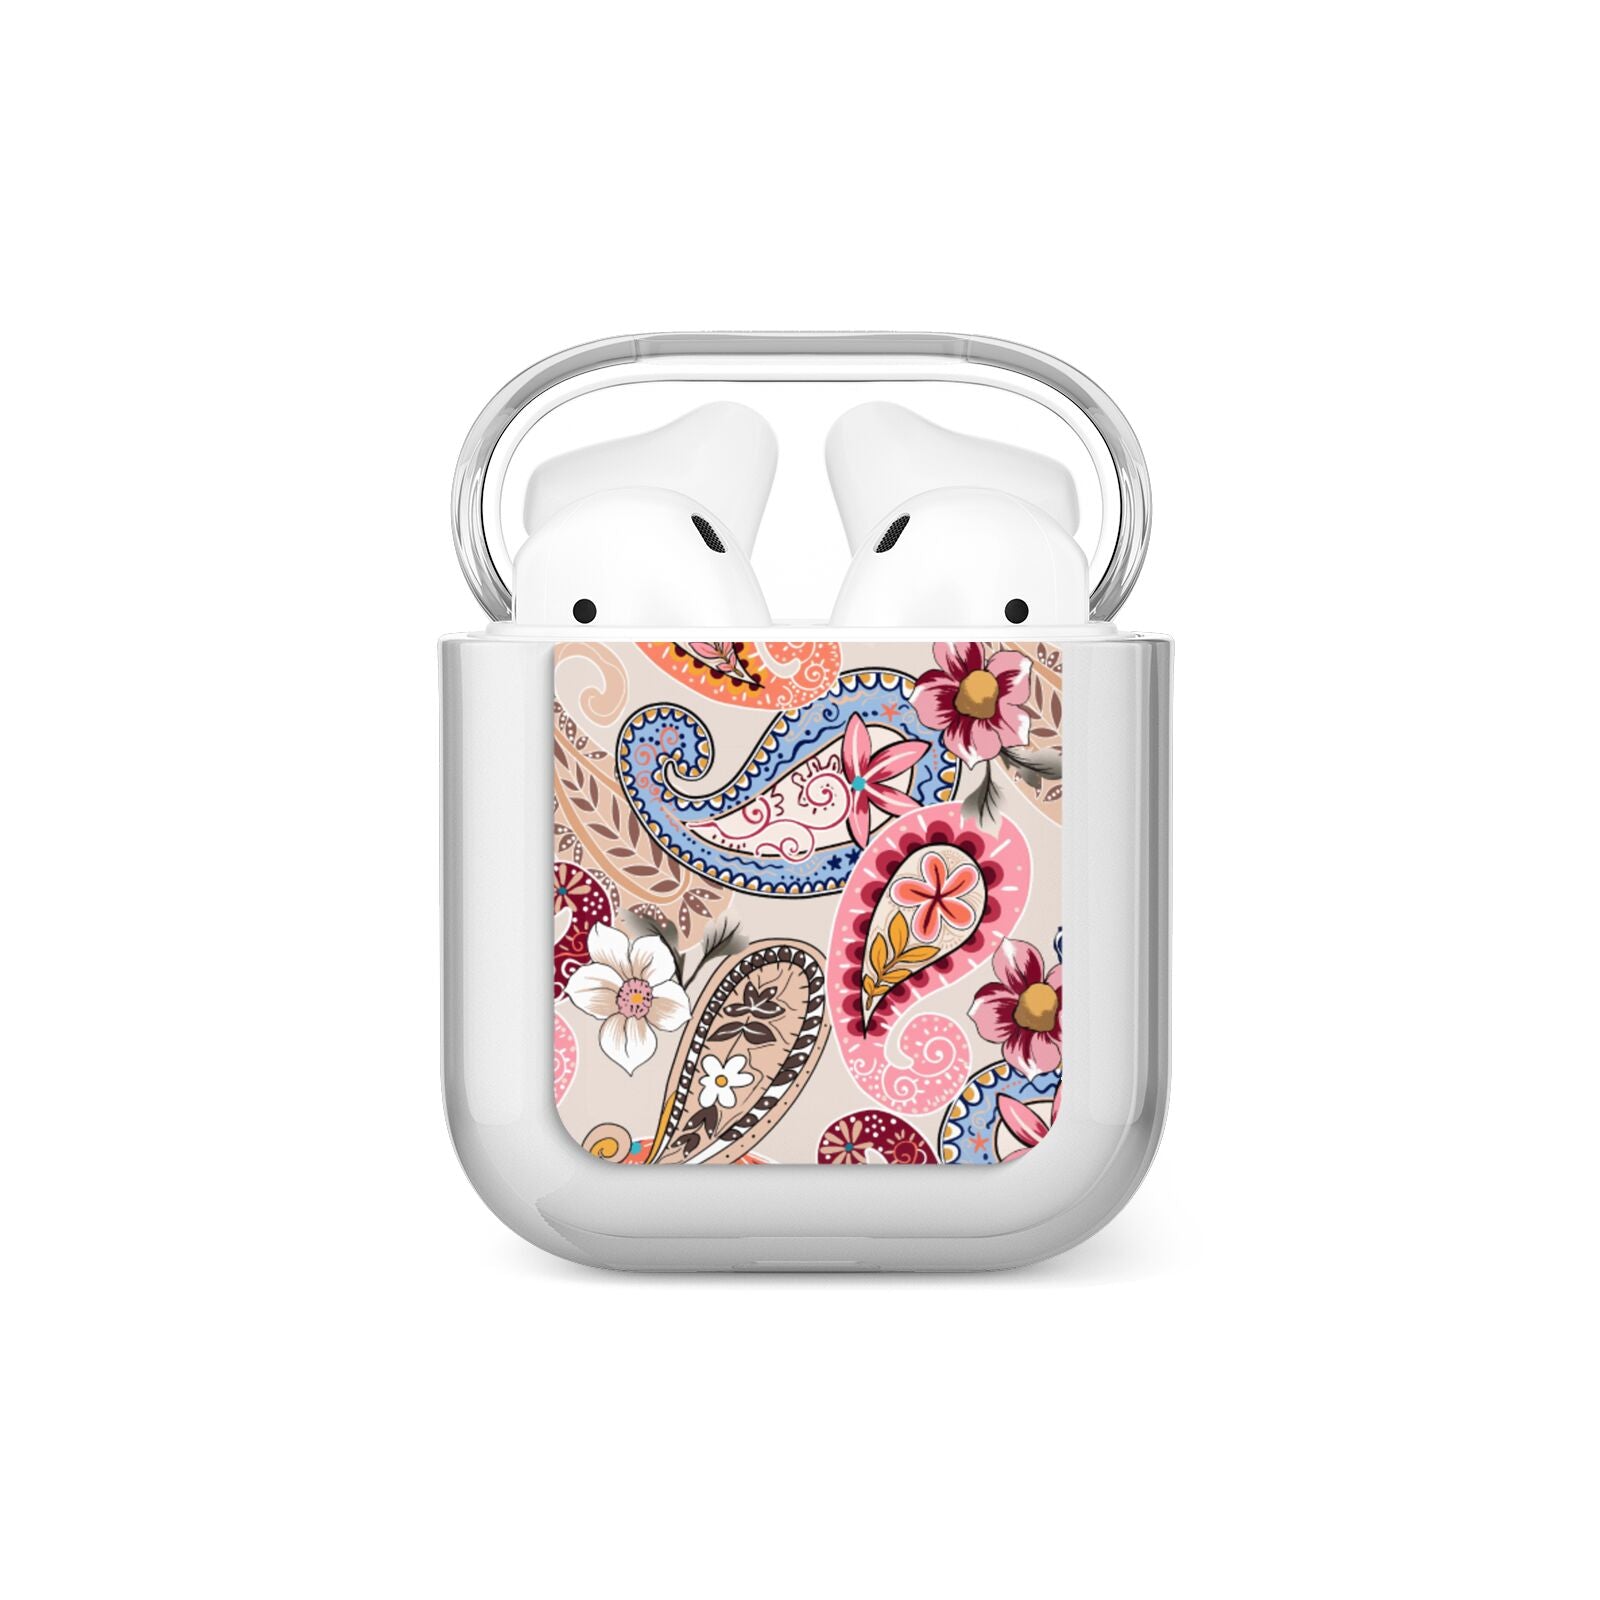 Paisley Cashmere Flowers AirPods Case